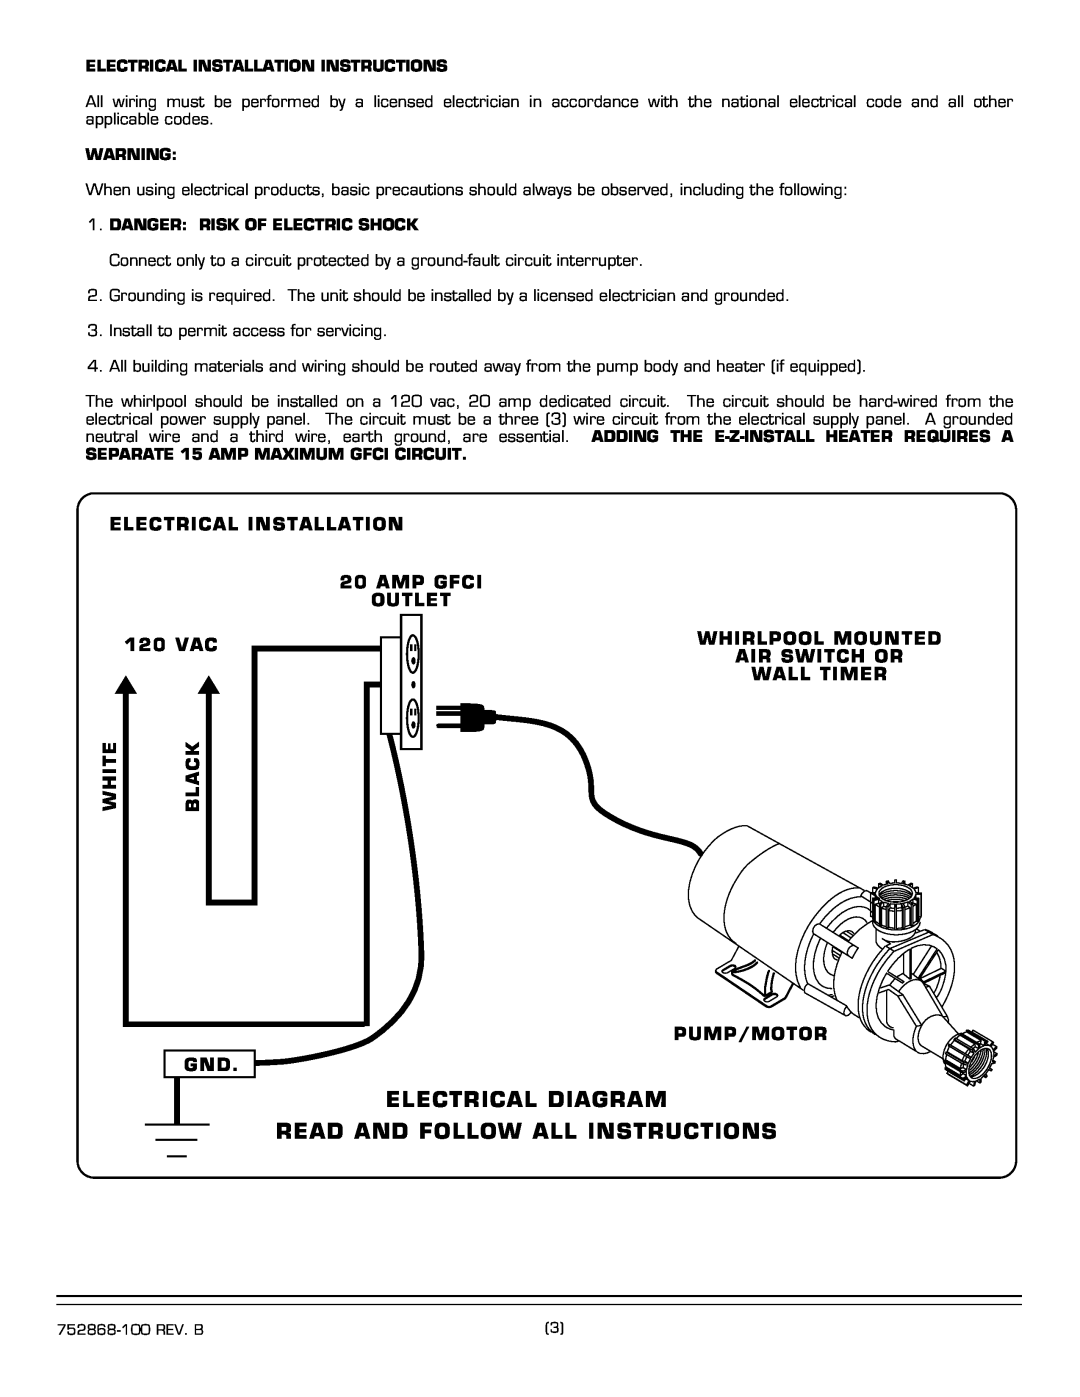 American Standard 7242E installation instructions Electrical Diagram, Read And Follow All Instructions 